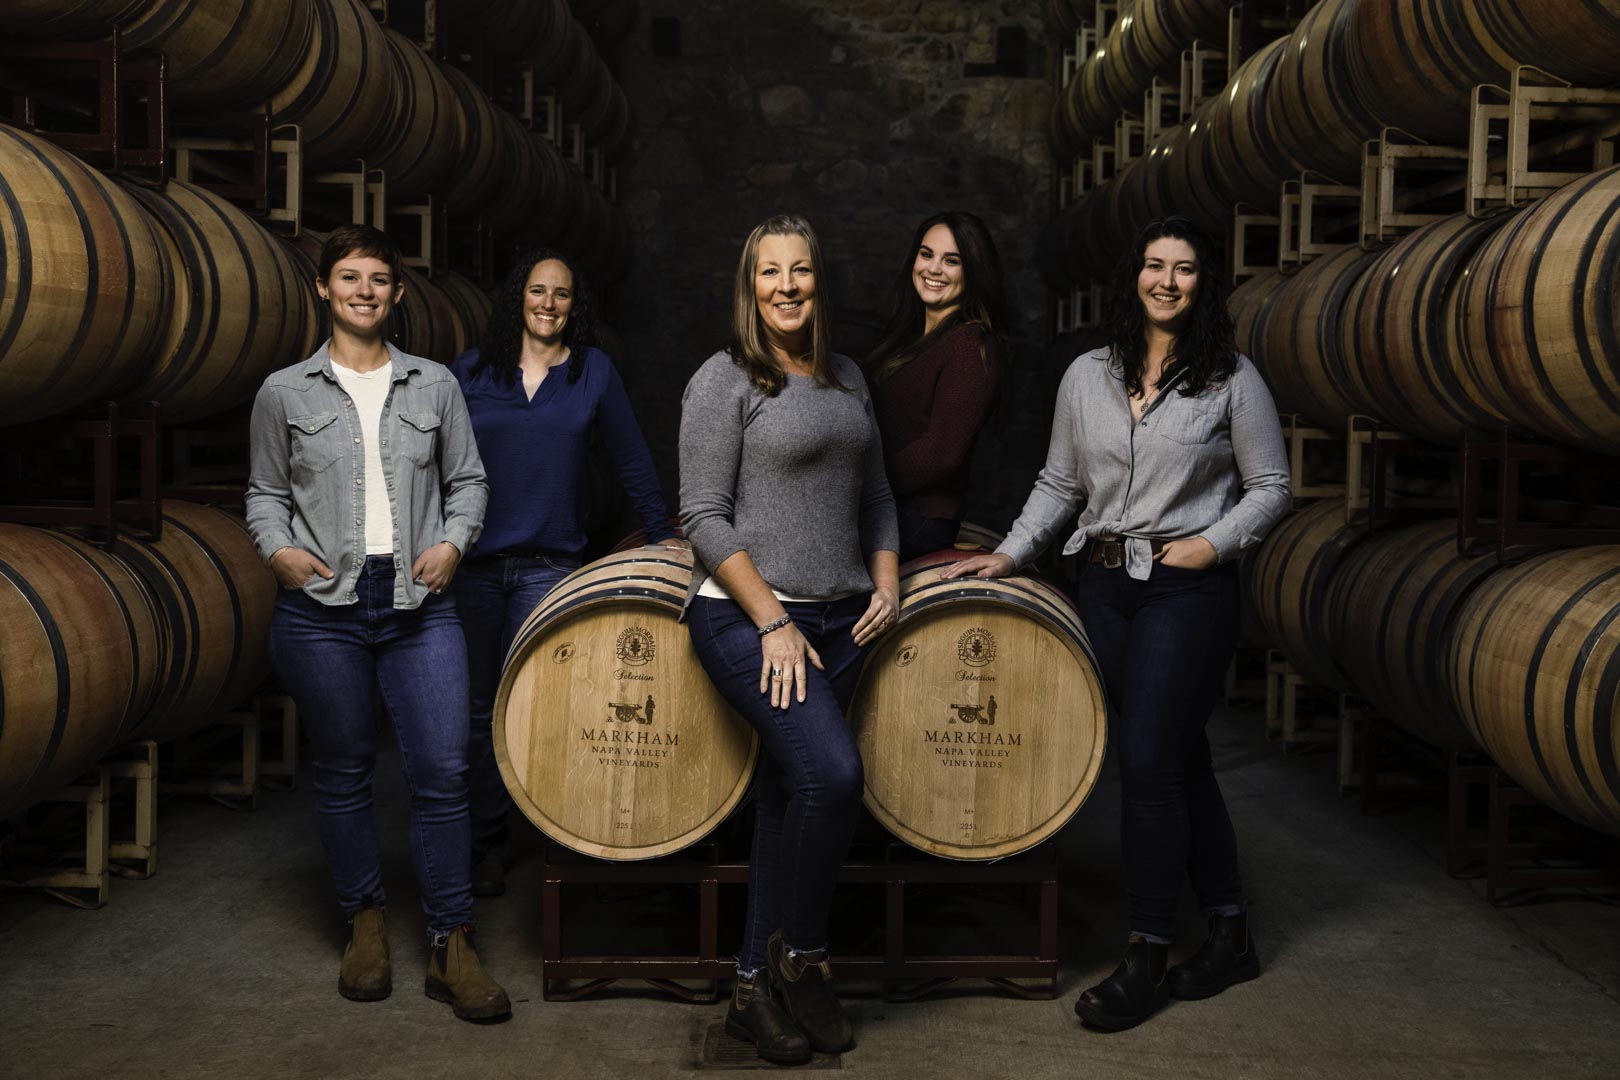 Women-Led Winemaking Team Portrait with all 5 women